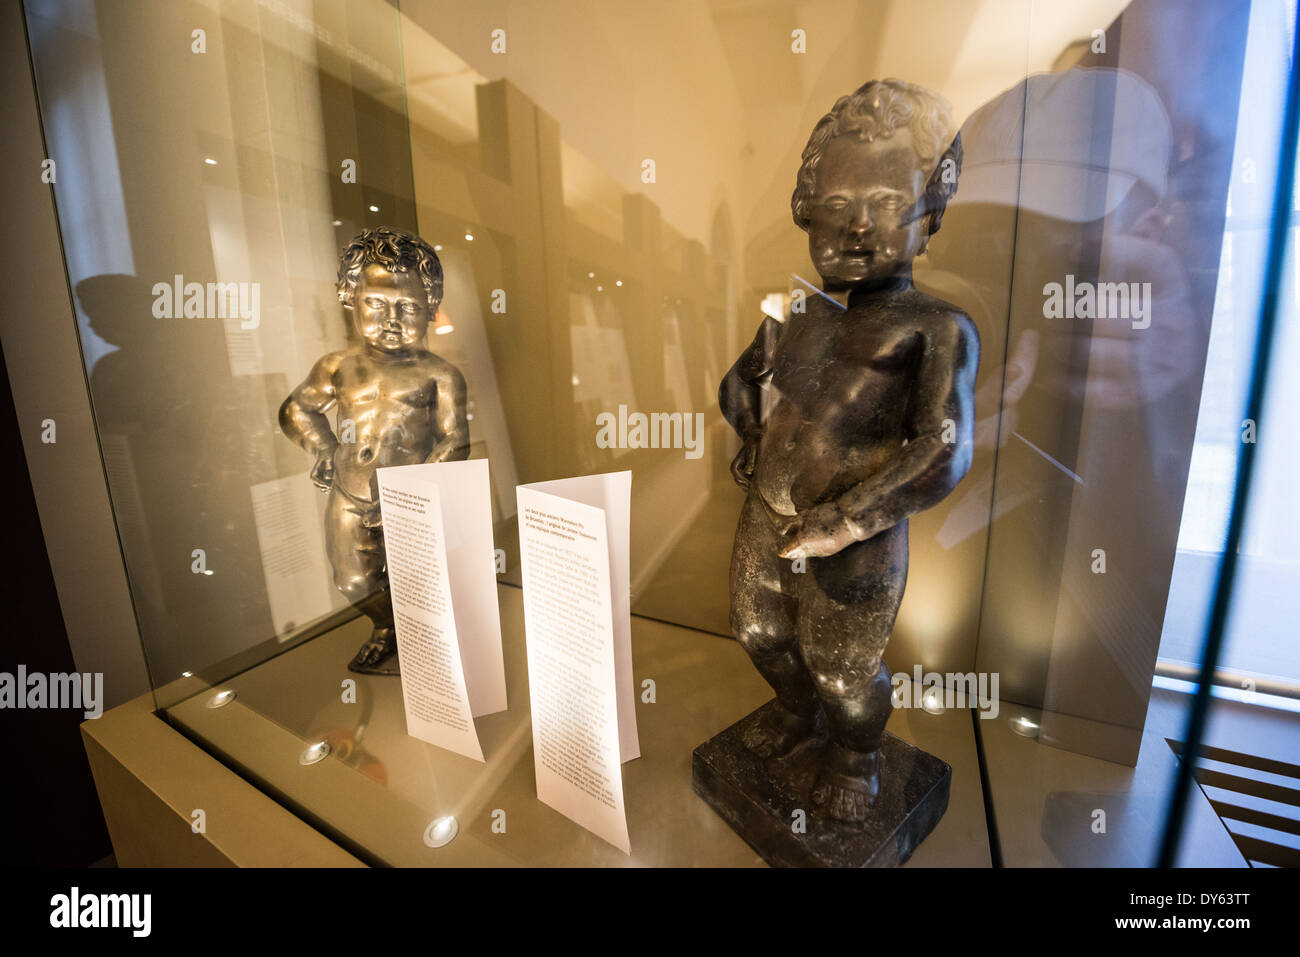 The original Mannekin Pis on display at the Museum of the City of Brussels. The museum is dedicated to the history and folklore of the town of Brussels, its development from its beginnings to today, which it presents through paintings, sculptures, tapistries, engravings, photos and models. Stock Photo